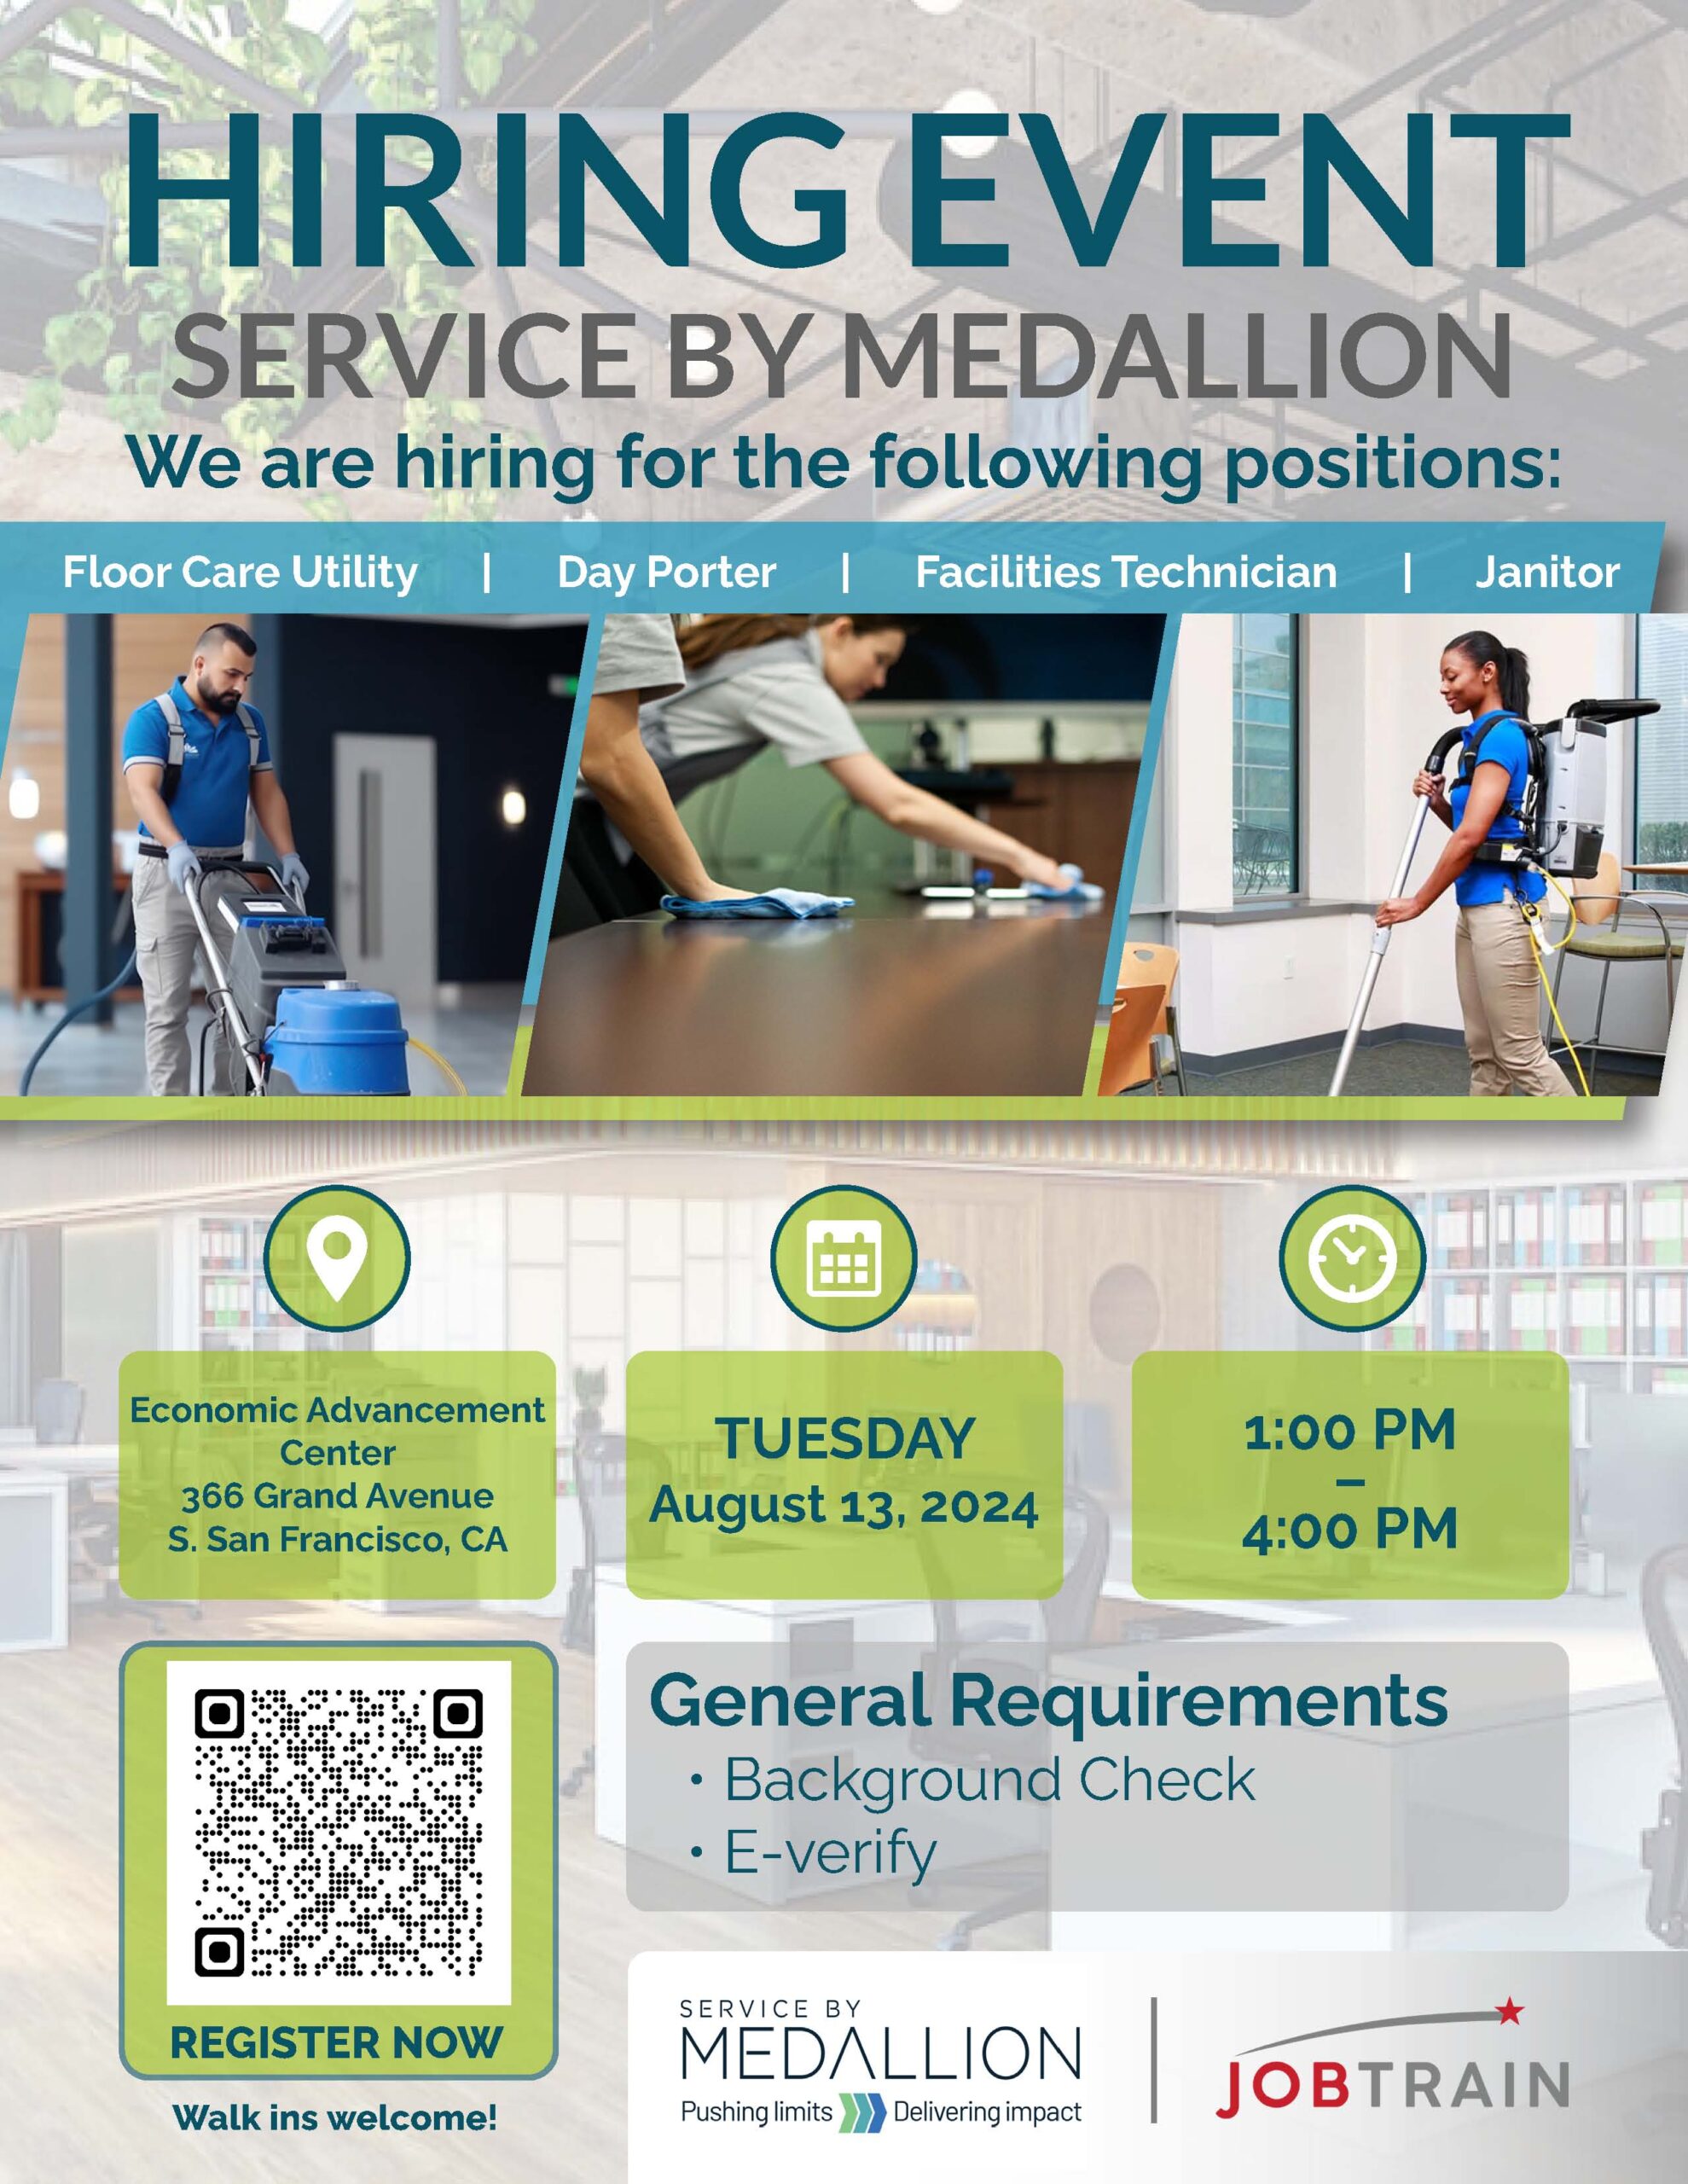 Service by Medallion Hiring Event - South San Francisco, CA - August 13, 2024